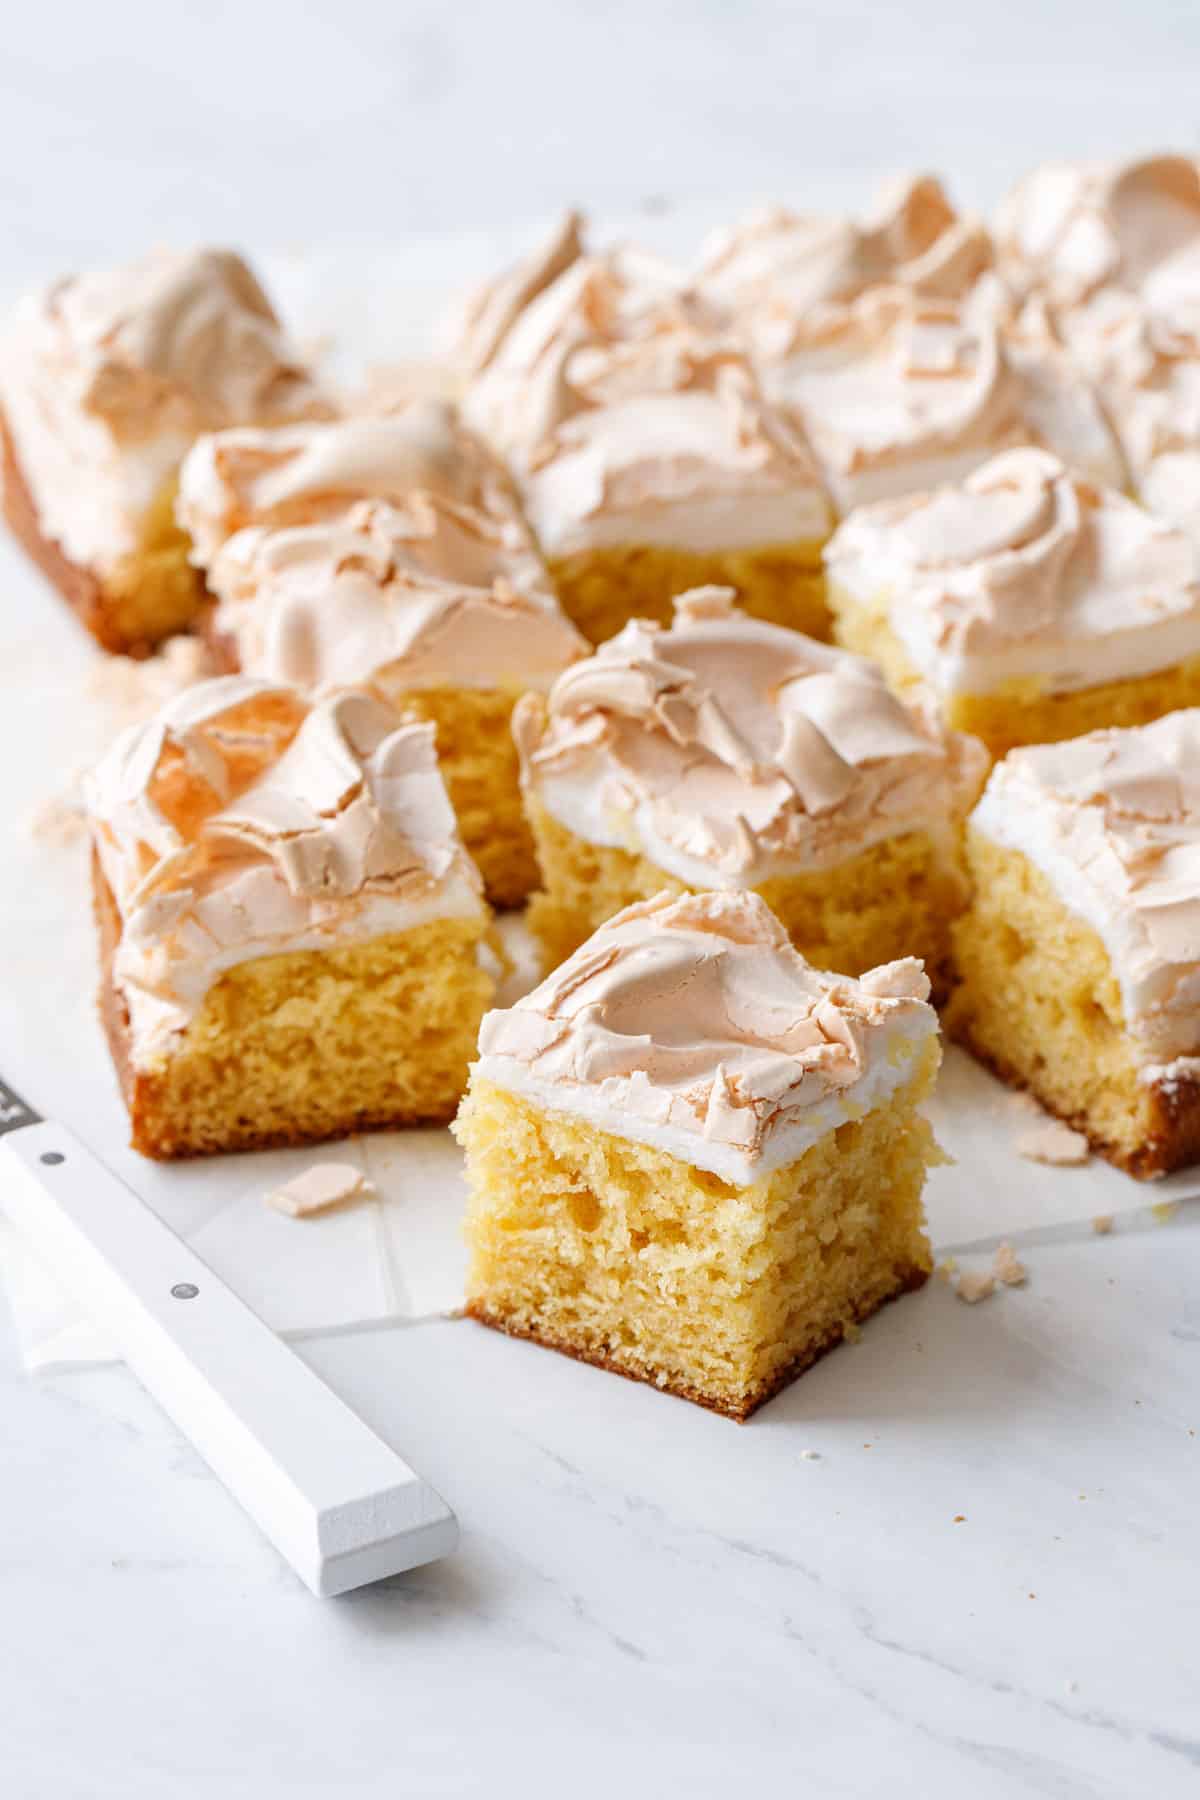 Squares of Lemon Meringue Butter Cake with a coarsely textured, yellow colored crumb and a light golden toasted meringue topping.